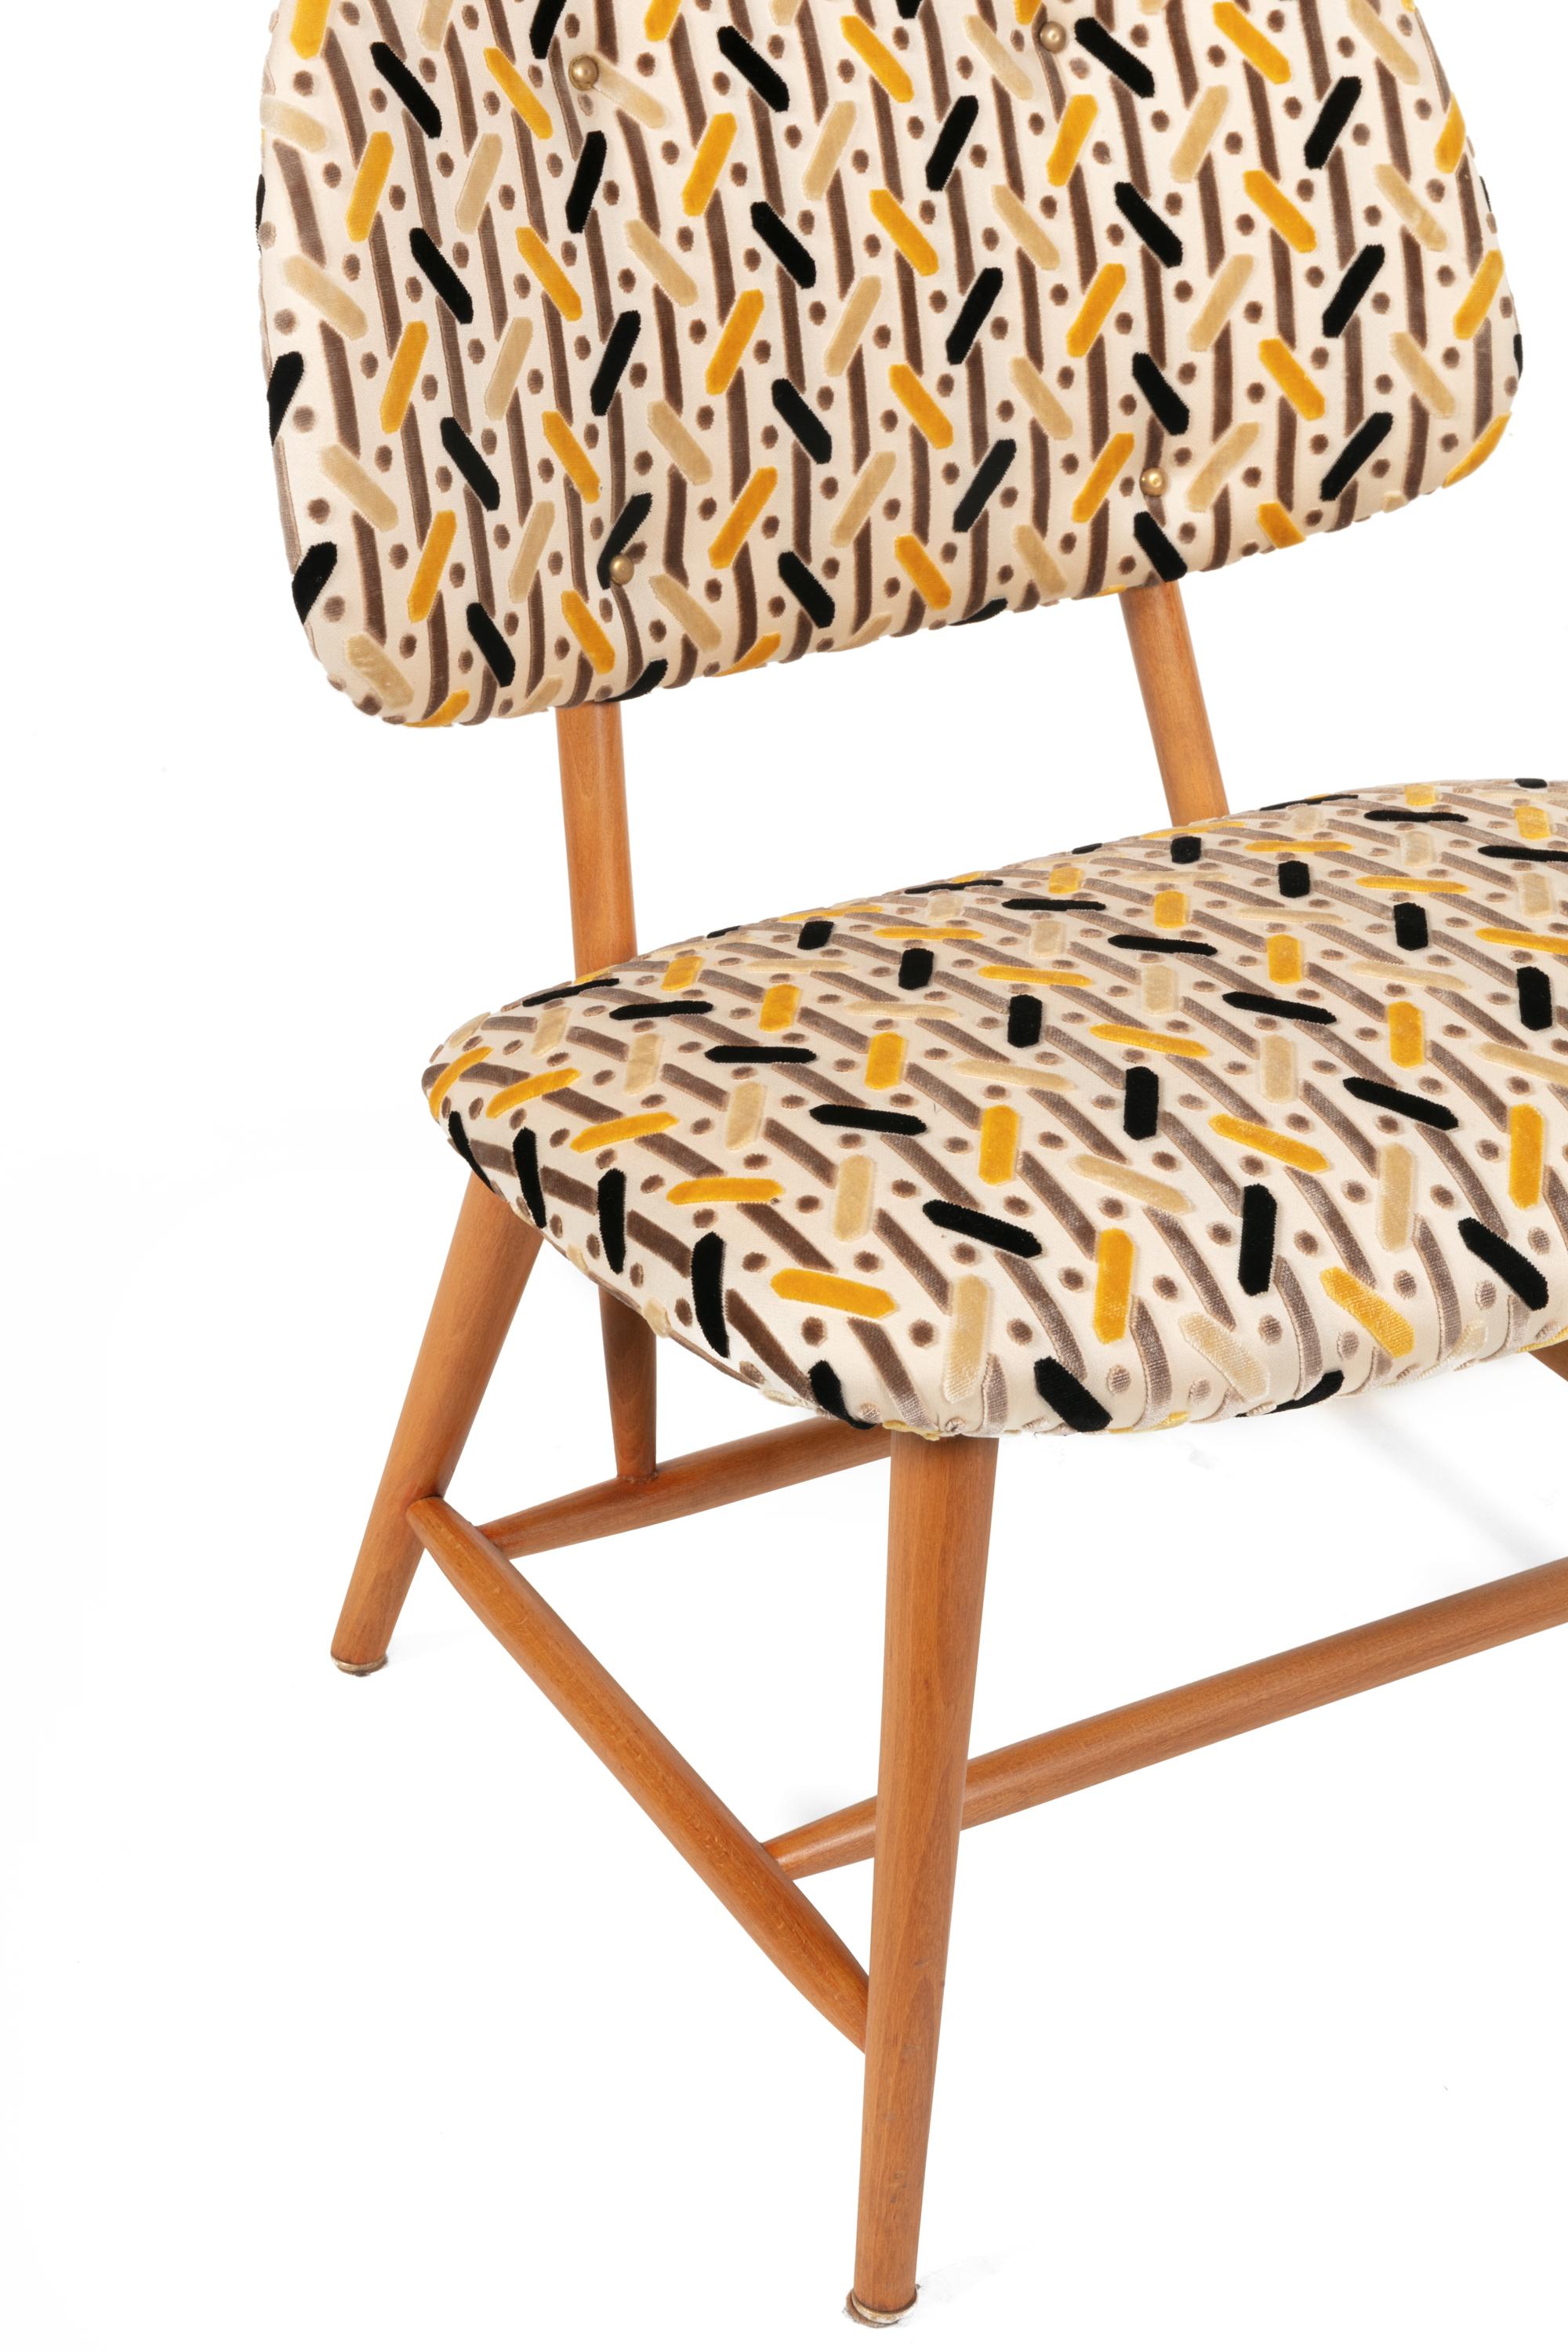 Fabric Armless Reupholstered Wood Framed Lounge Chairs, Sweden 1950s